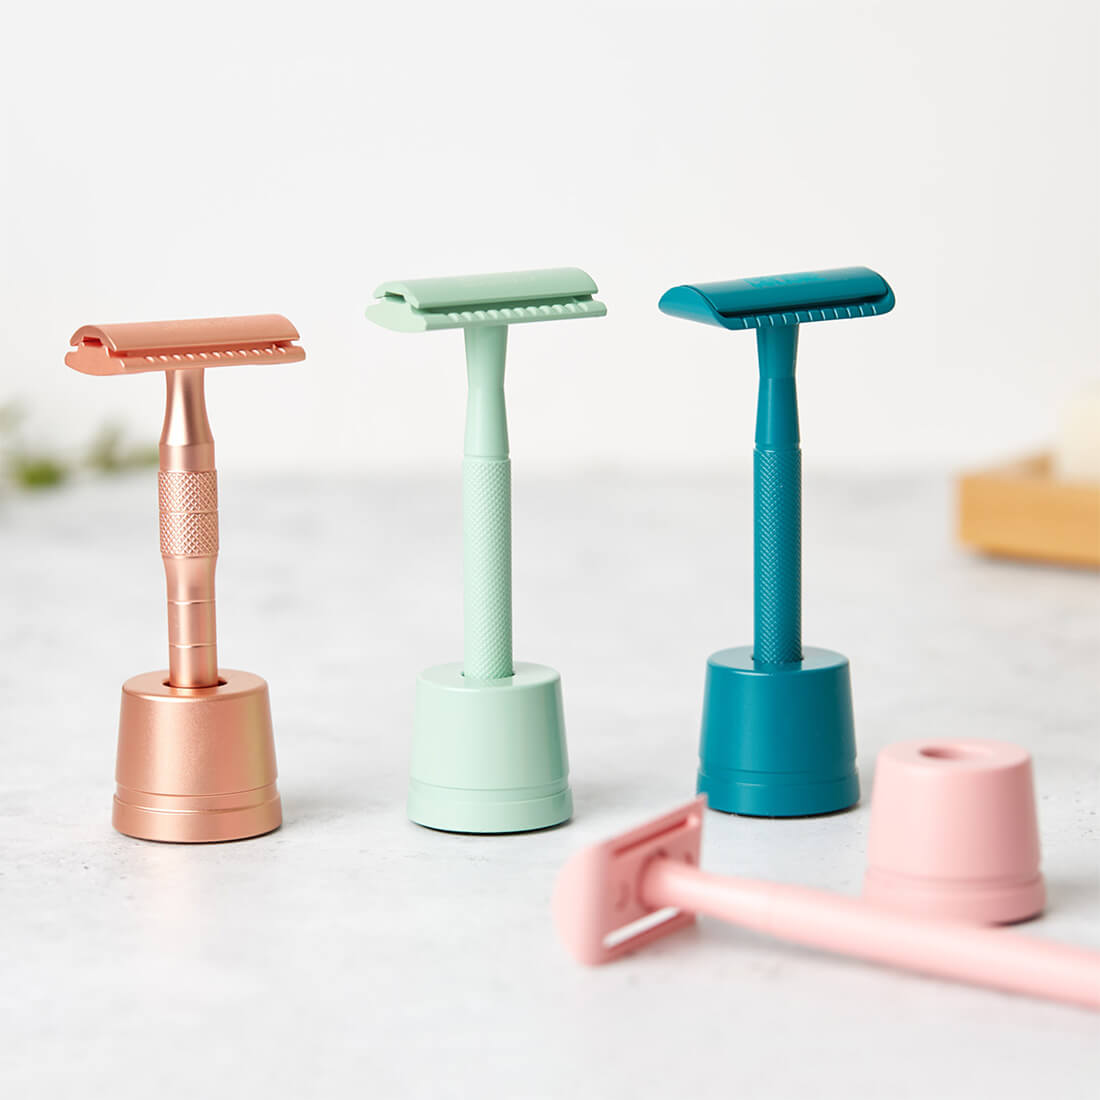 Reusable Safety Razors by Jungle Culture